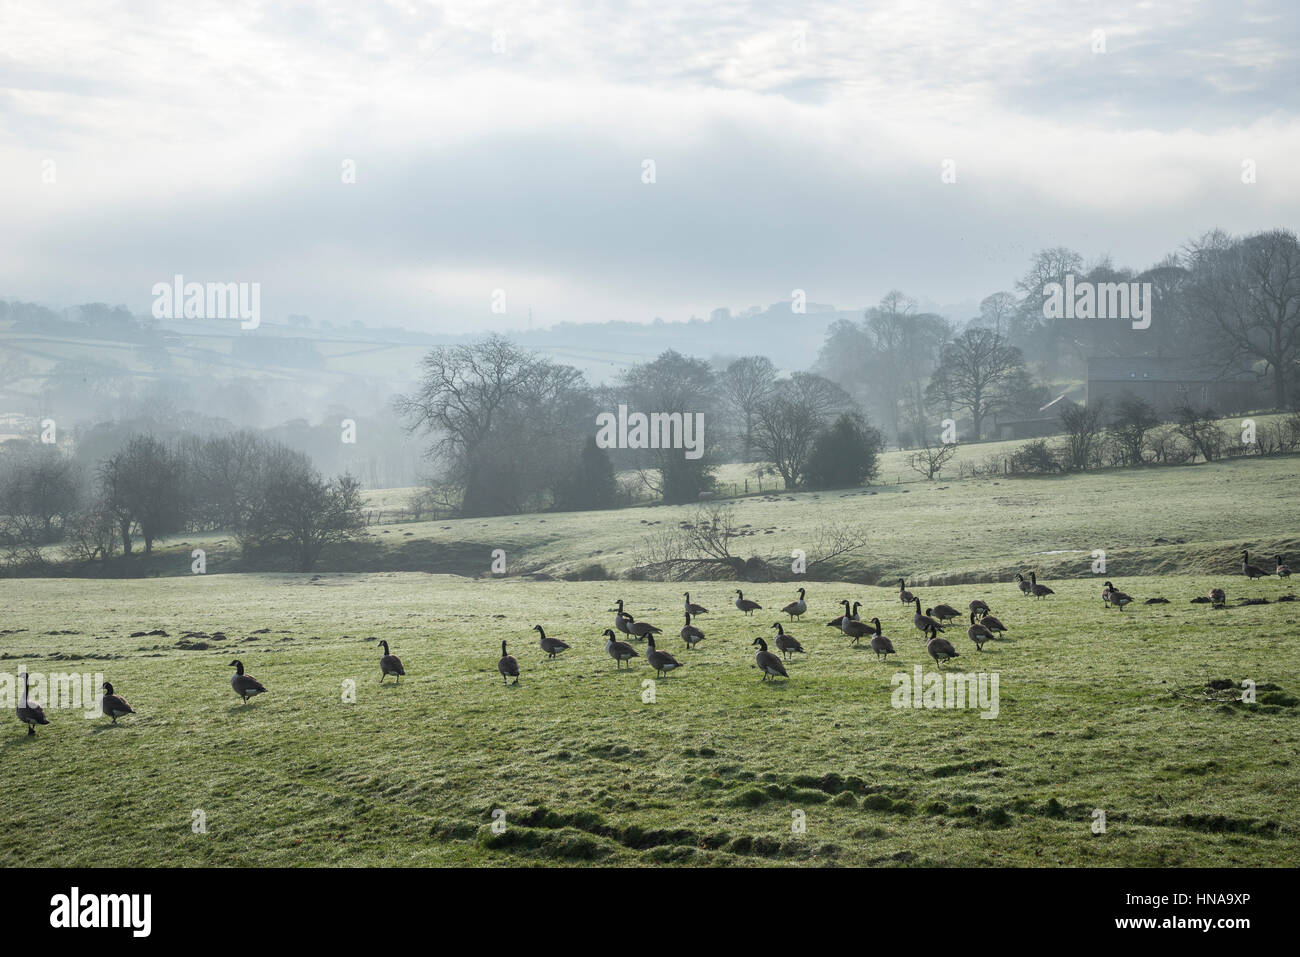 Flock of geese in a field of dewy grass on a misty winter morning in the English countryside. Stock Photo